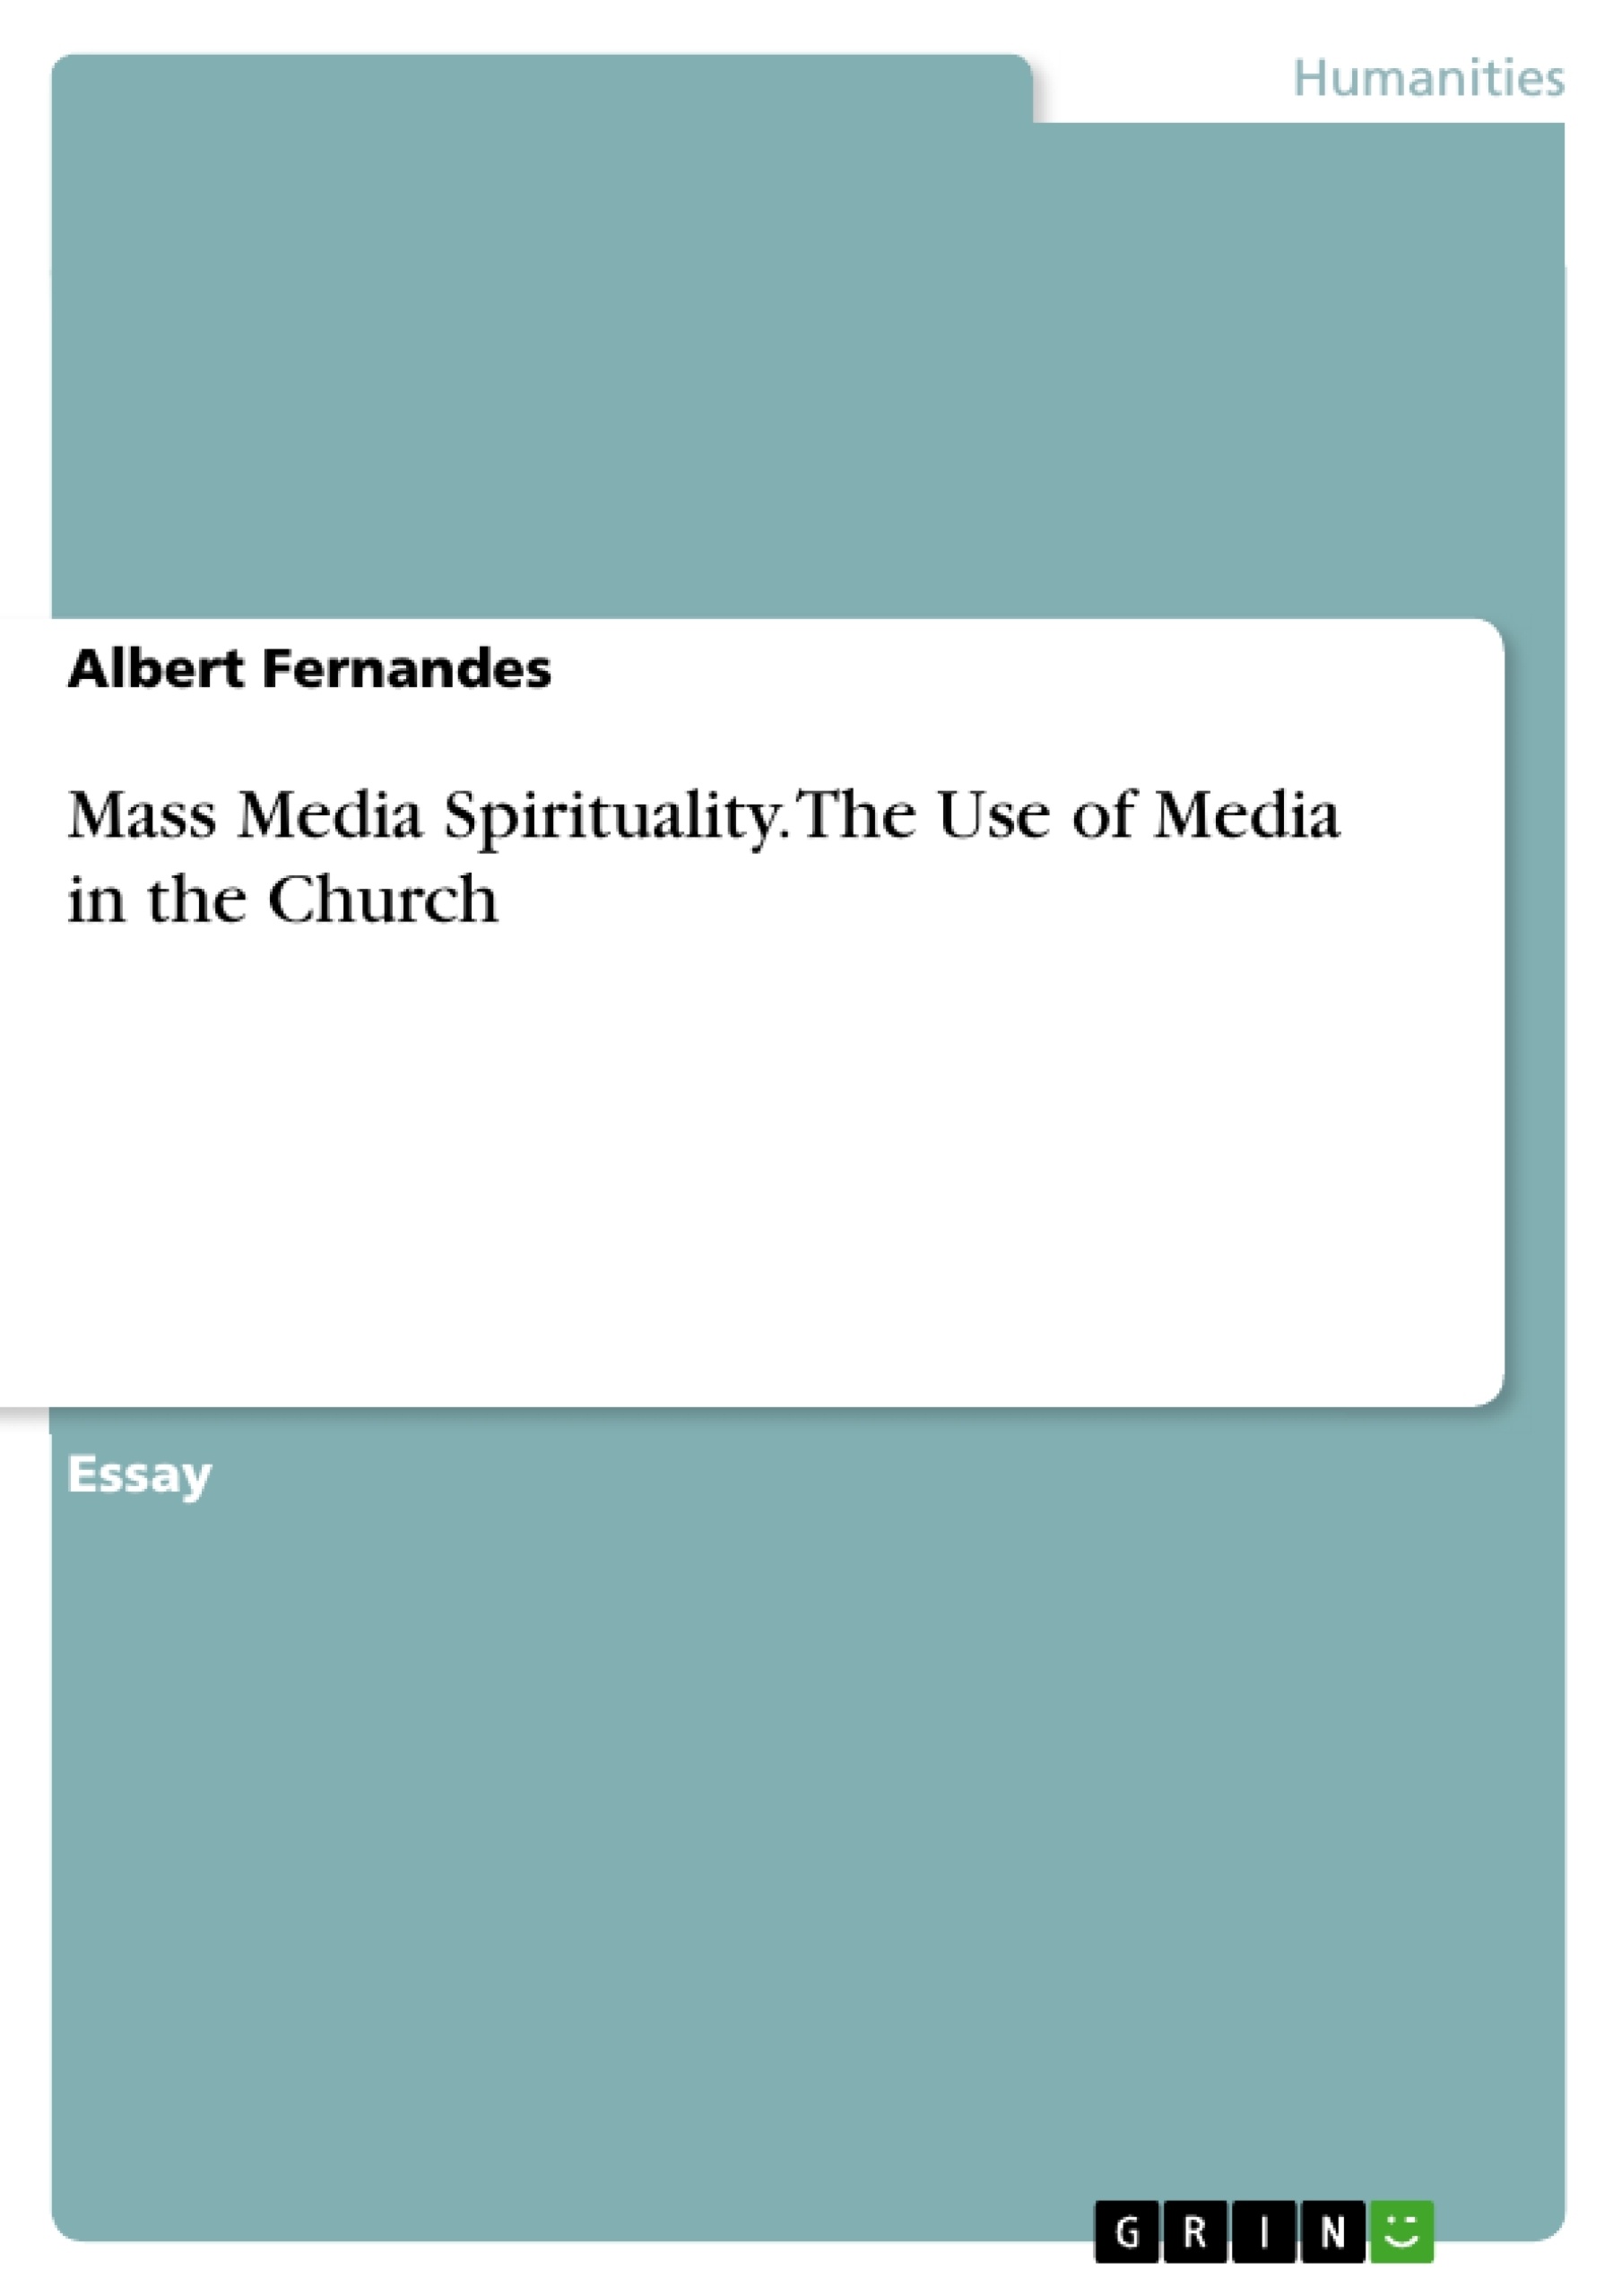 Title: Mass Media Spirituality. The Use of Media in the Church